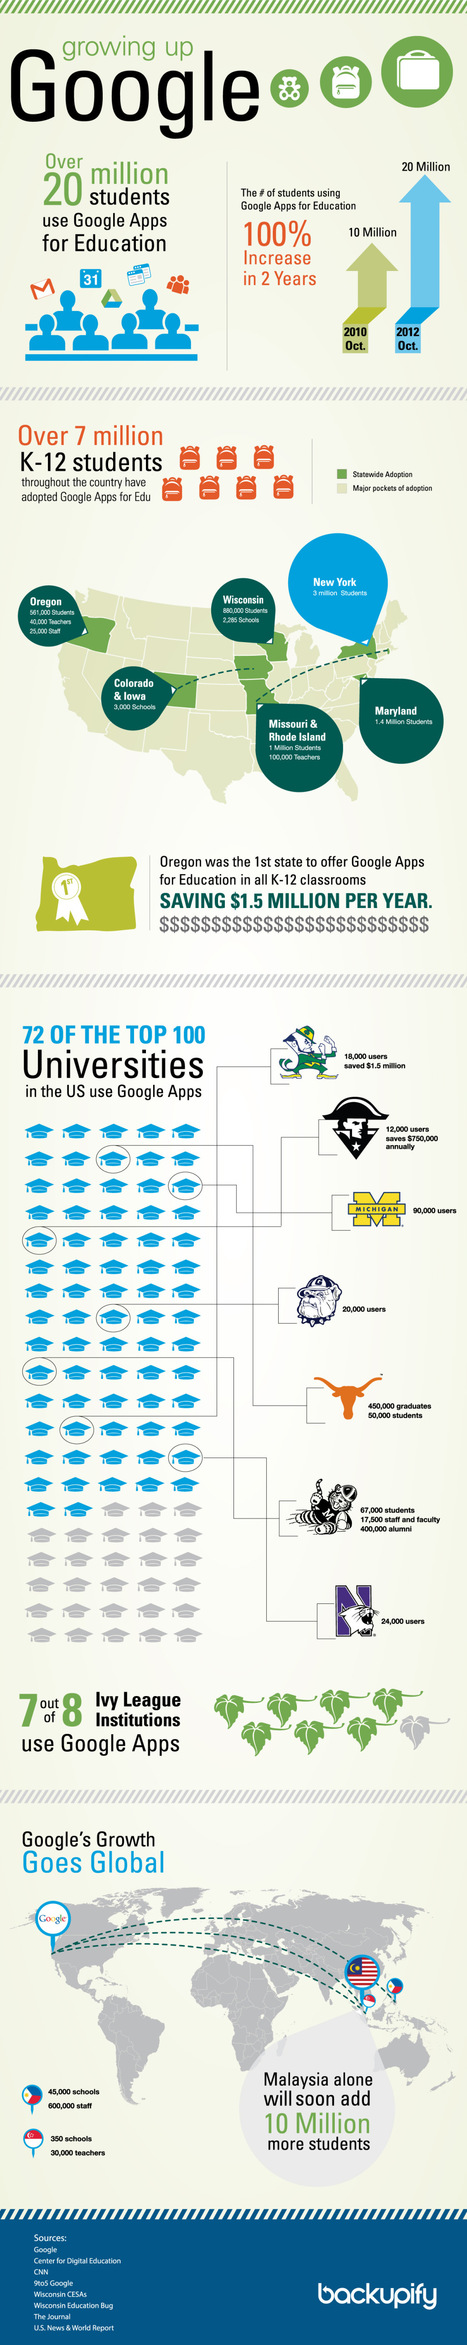 Schooled by Google: How Google Apps is penetrating education [infographic] | :: The 4th Era :: | Scoop.it